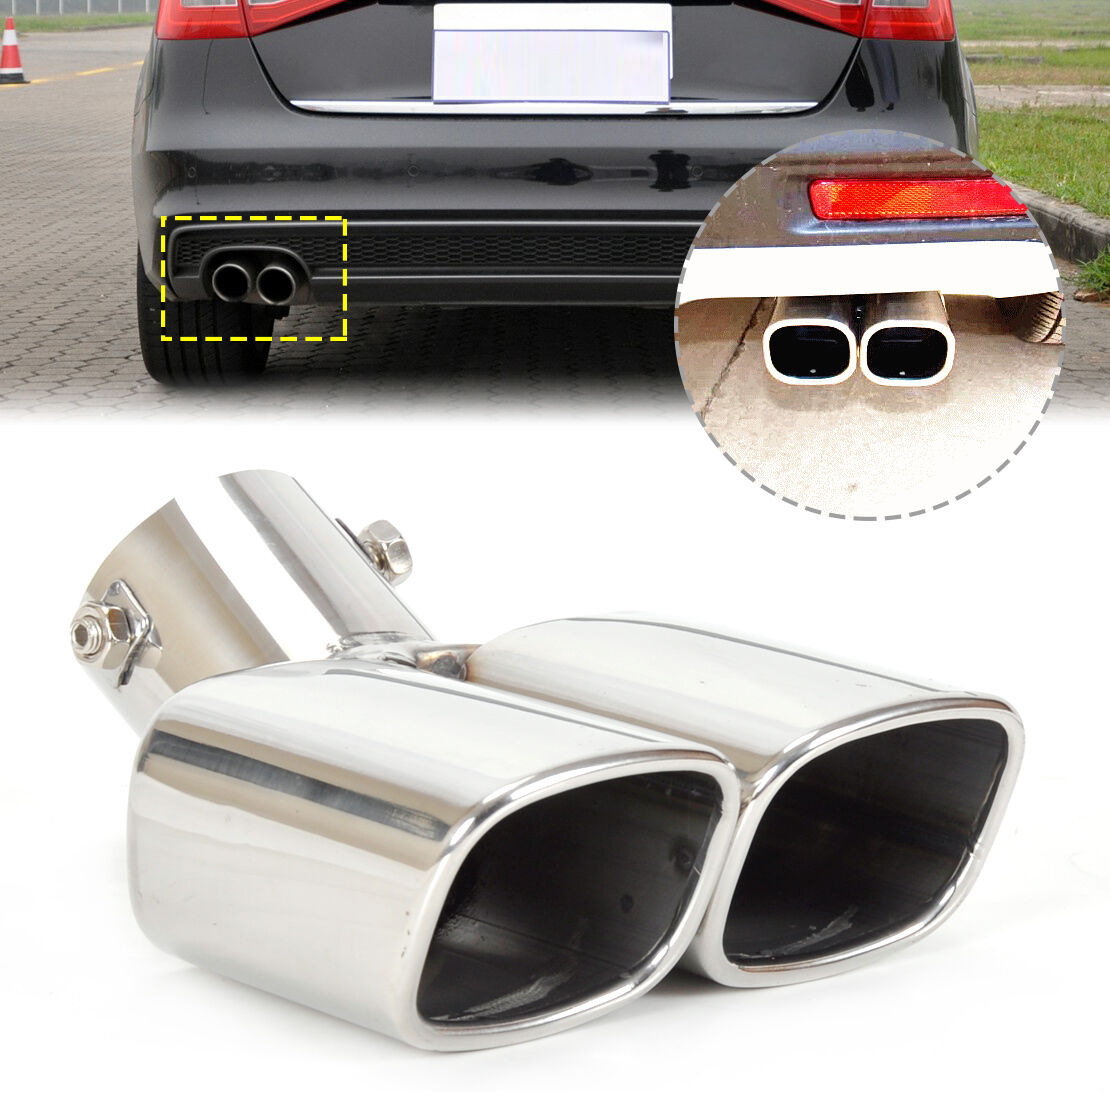 CURVED Exhaust Tail Pipe Rear Muffler End Trim  58mm For Versa Kia Focus Toyota